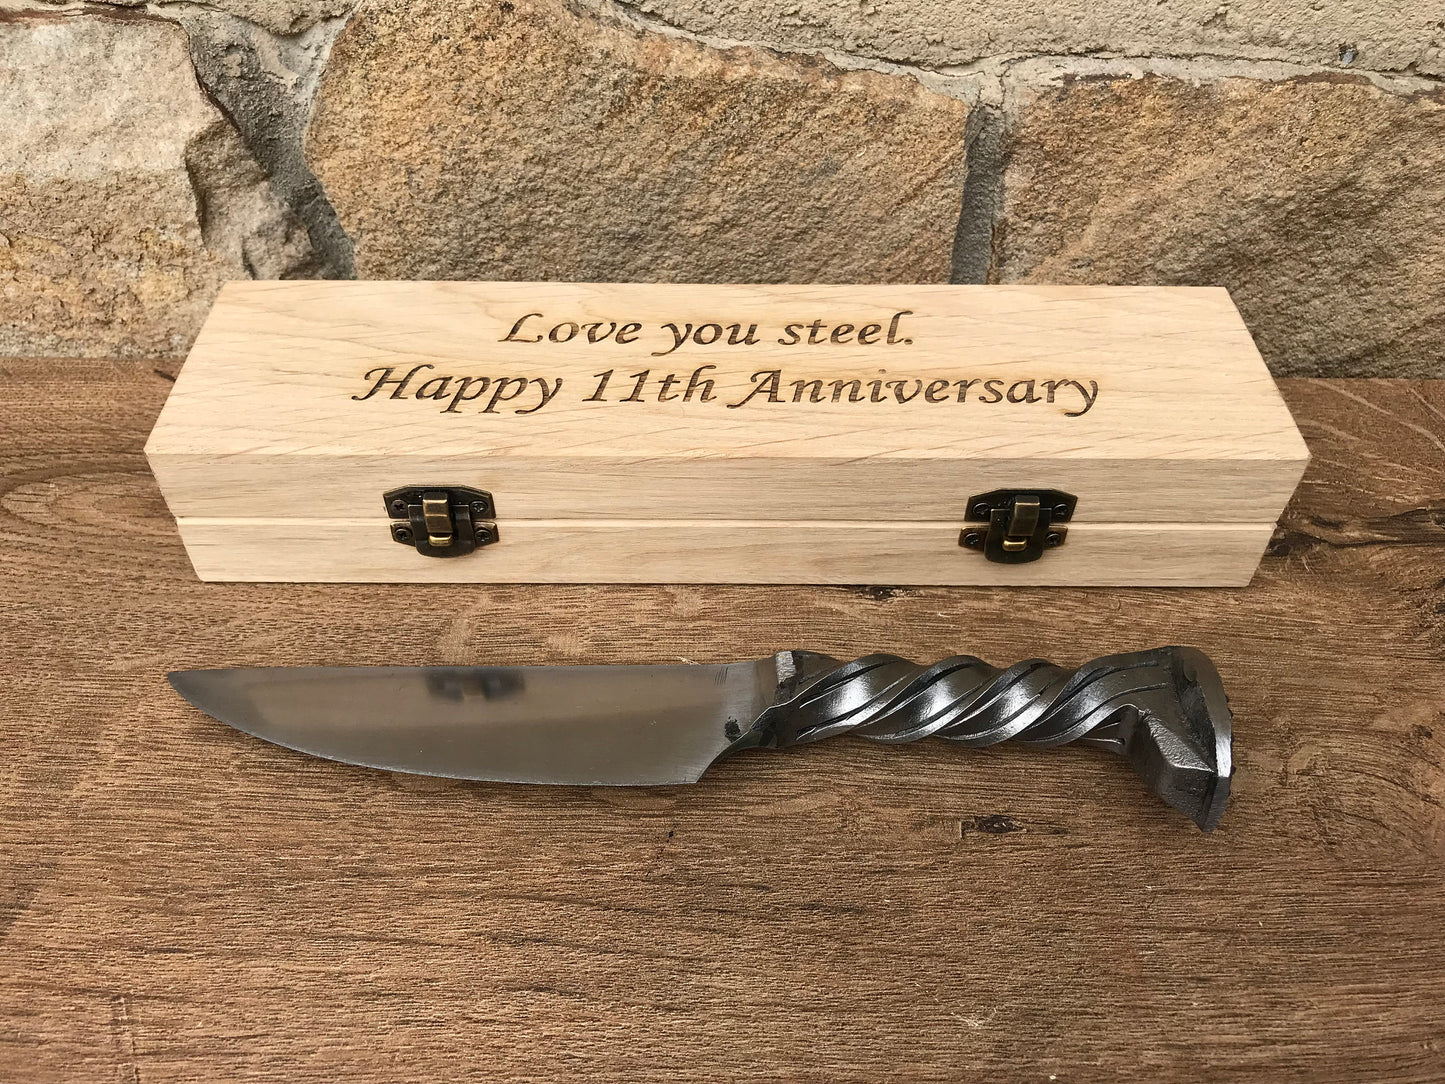 11th anniversary, railroad spike knife, iron anniversary, 11 year anniversary, forged in fire, dagger, present for him,railroad spike dagger